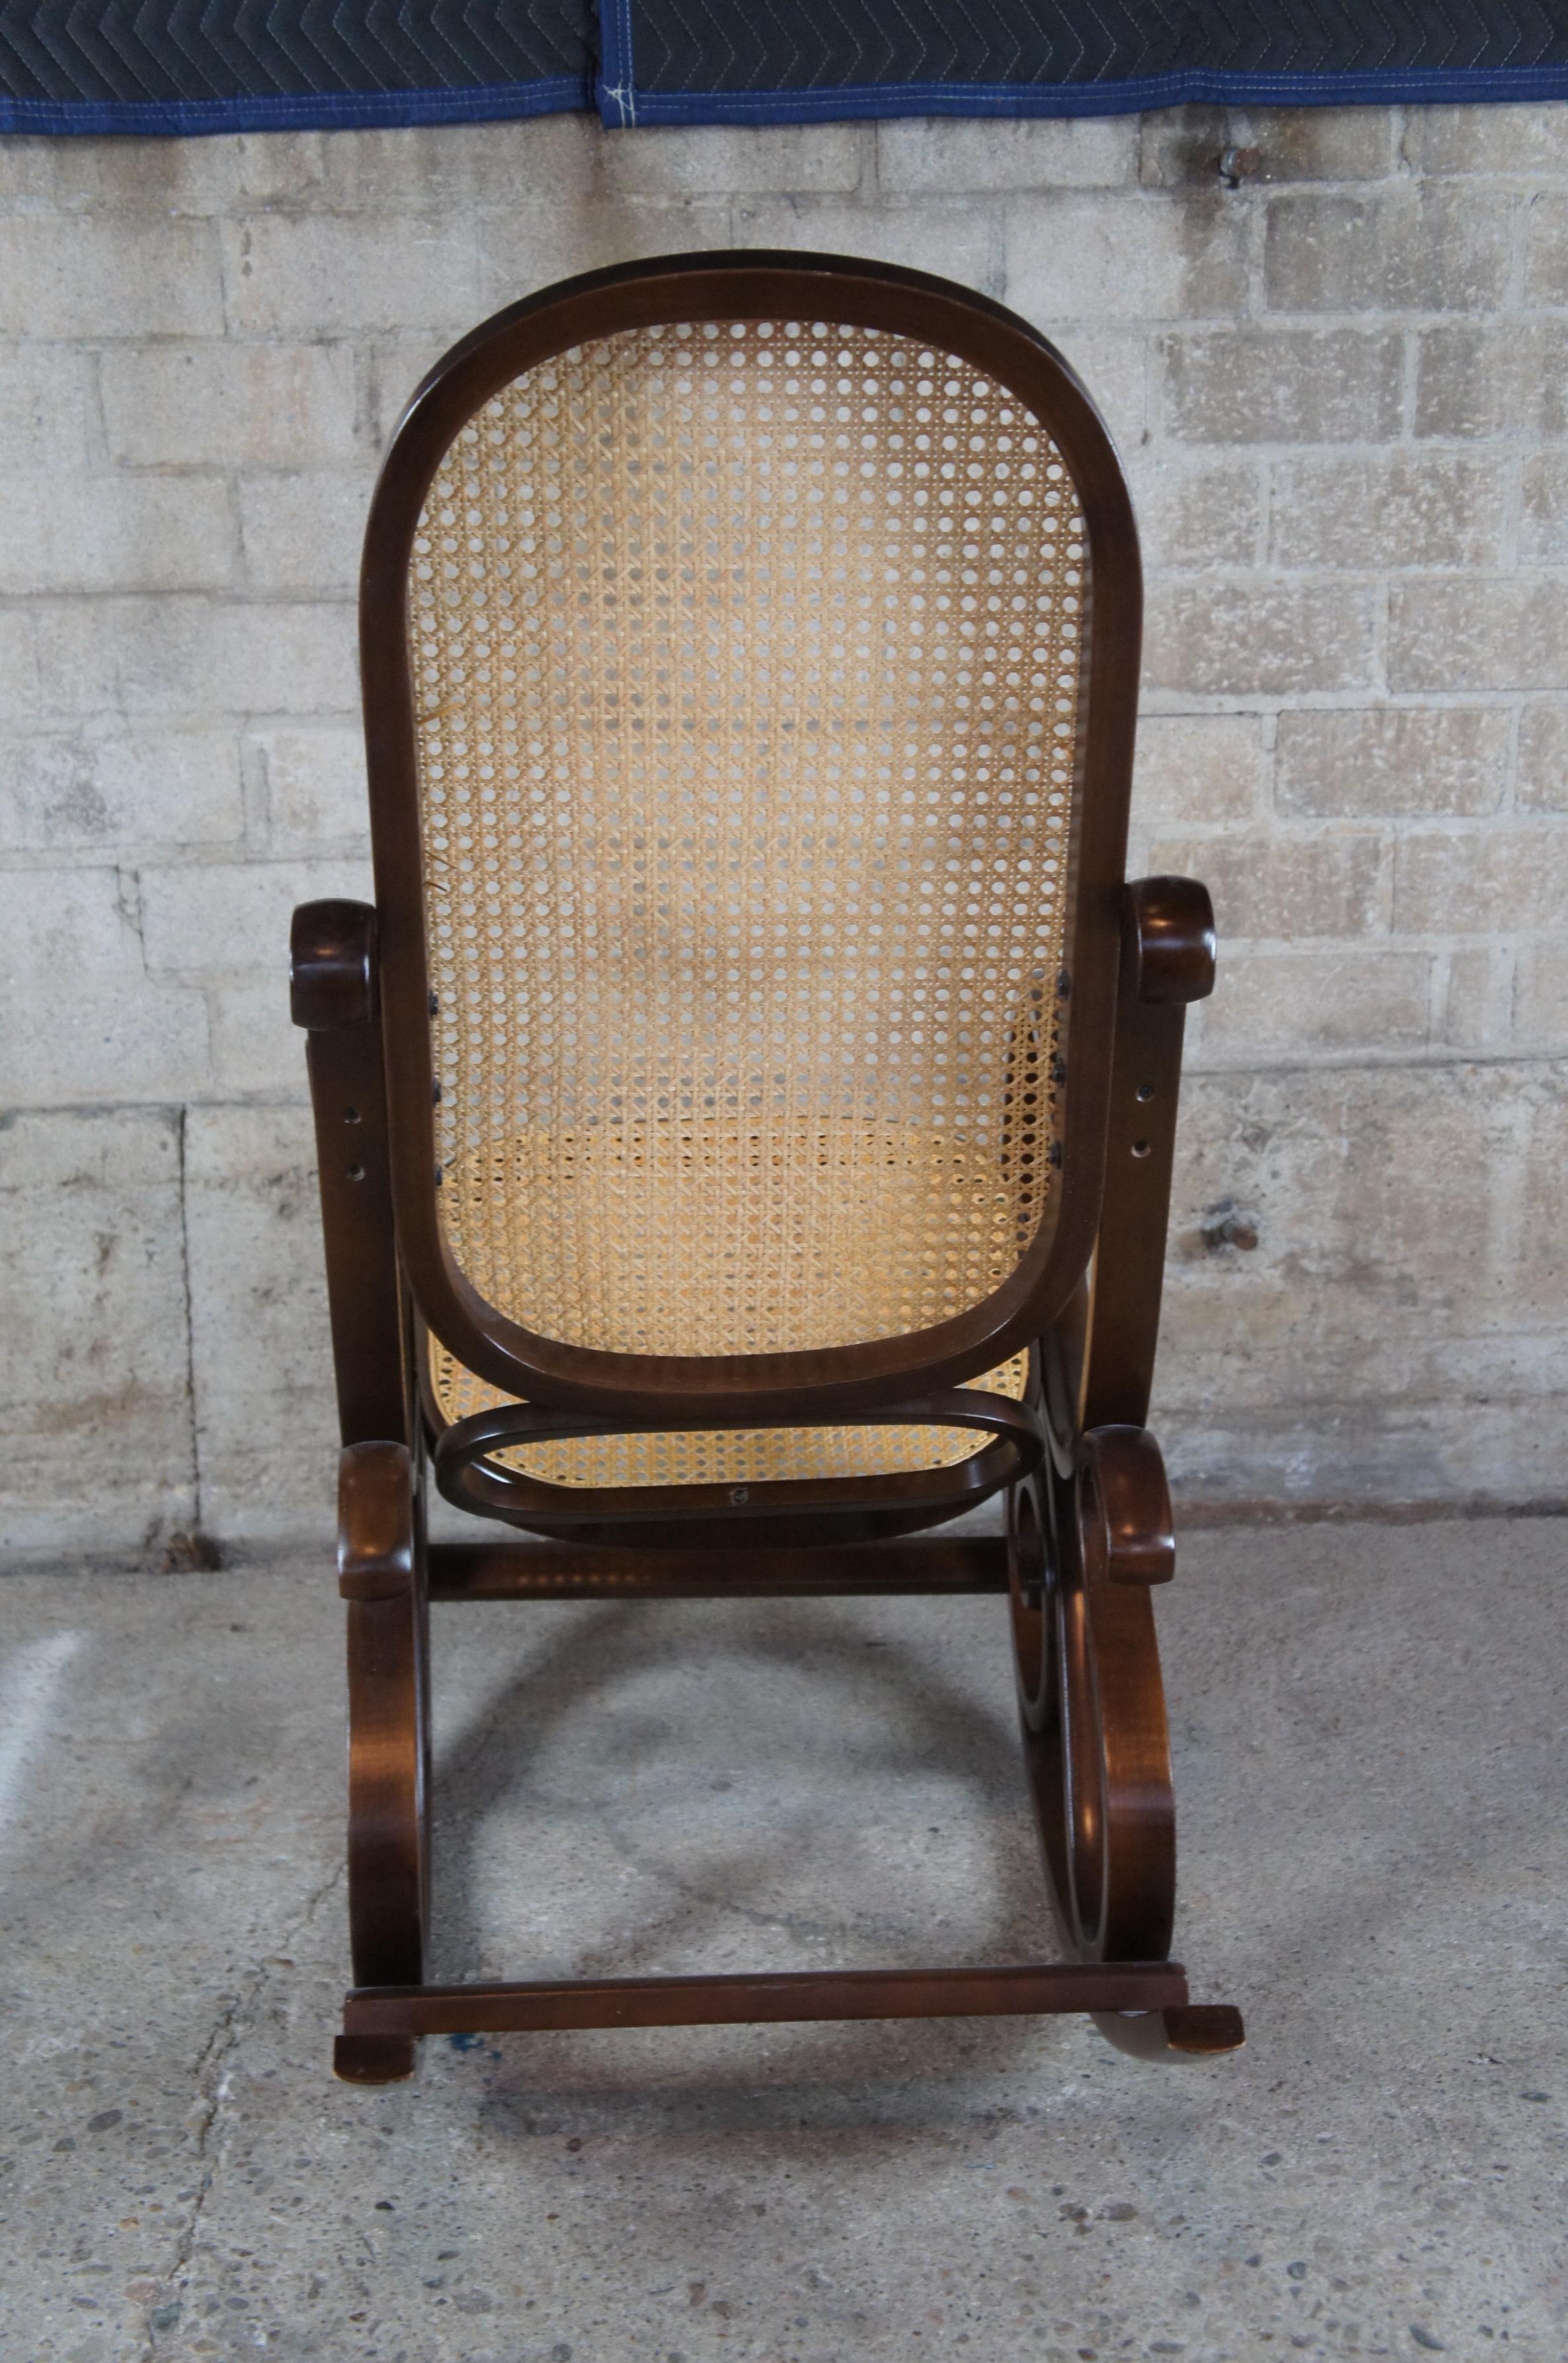 Mid-Century Modern Iconic Thonet Style Bentwood Rocking Chair Natural Cane Rattan Seat Back Rocker